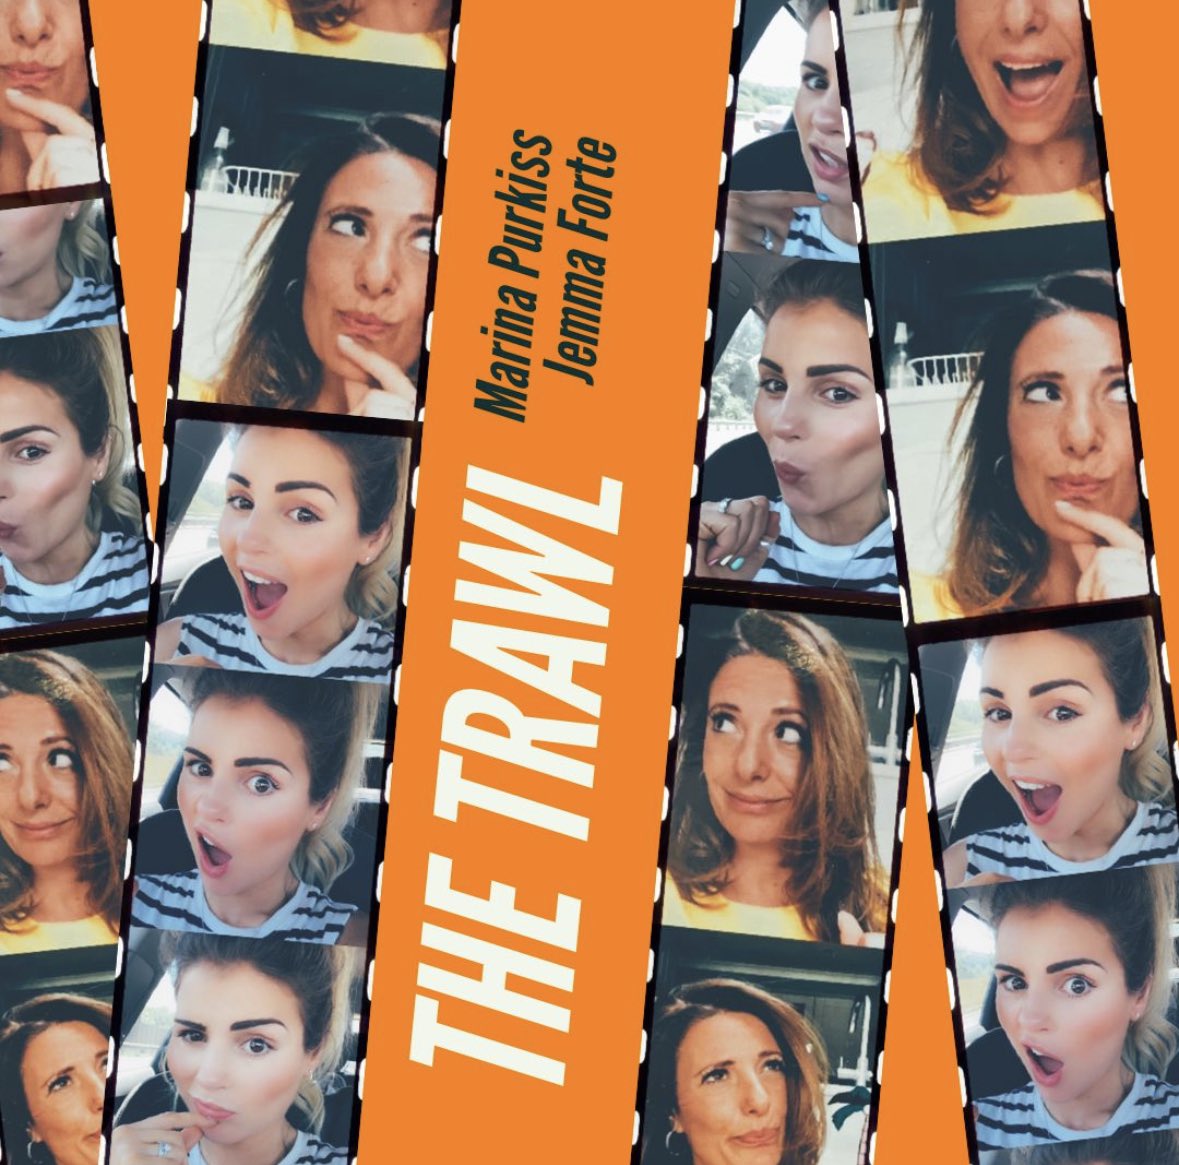 NEW 🚨@TheTrawlPodcast Tories Plotting and Kate Spotting 👀 With clips and tweets galore. And pudding from @munyachawawa Link below 👇